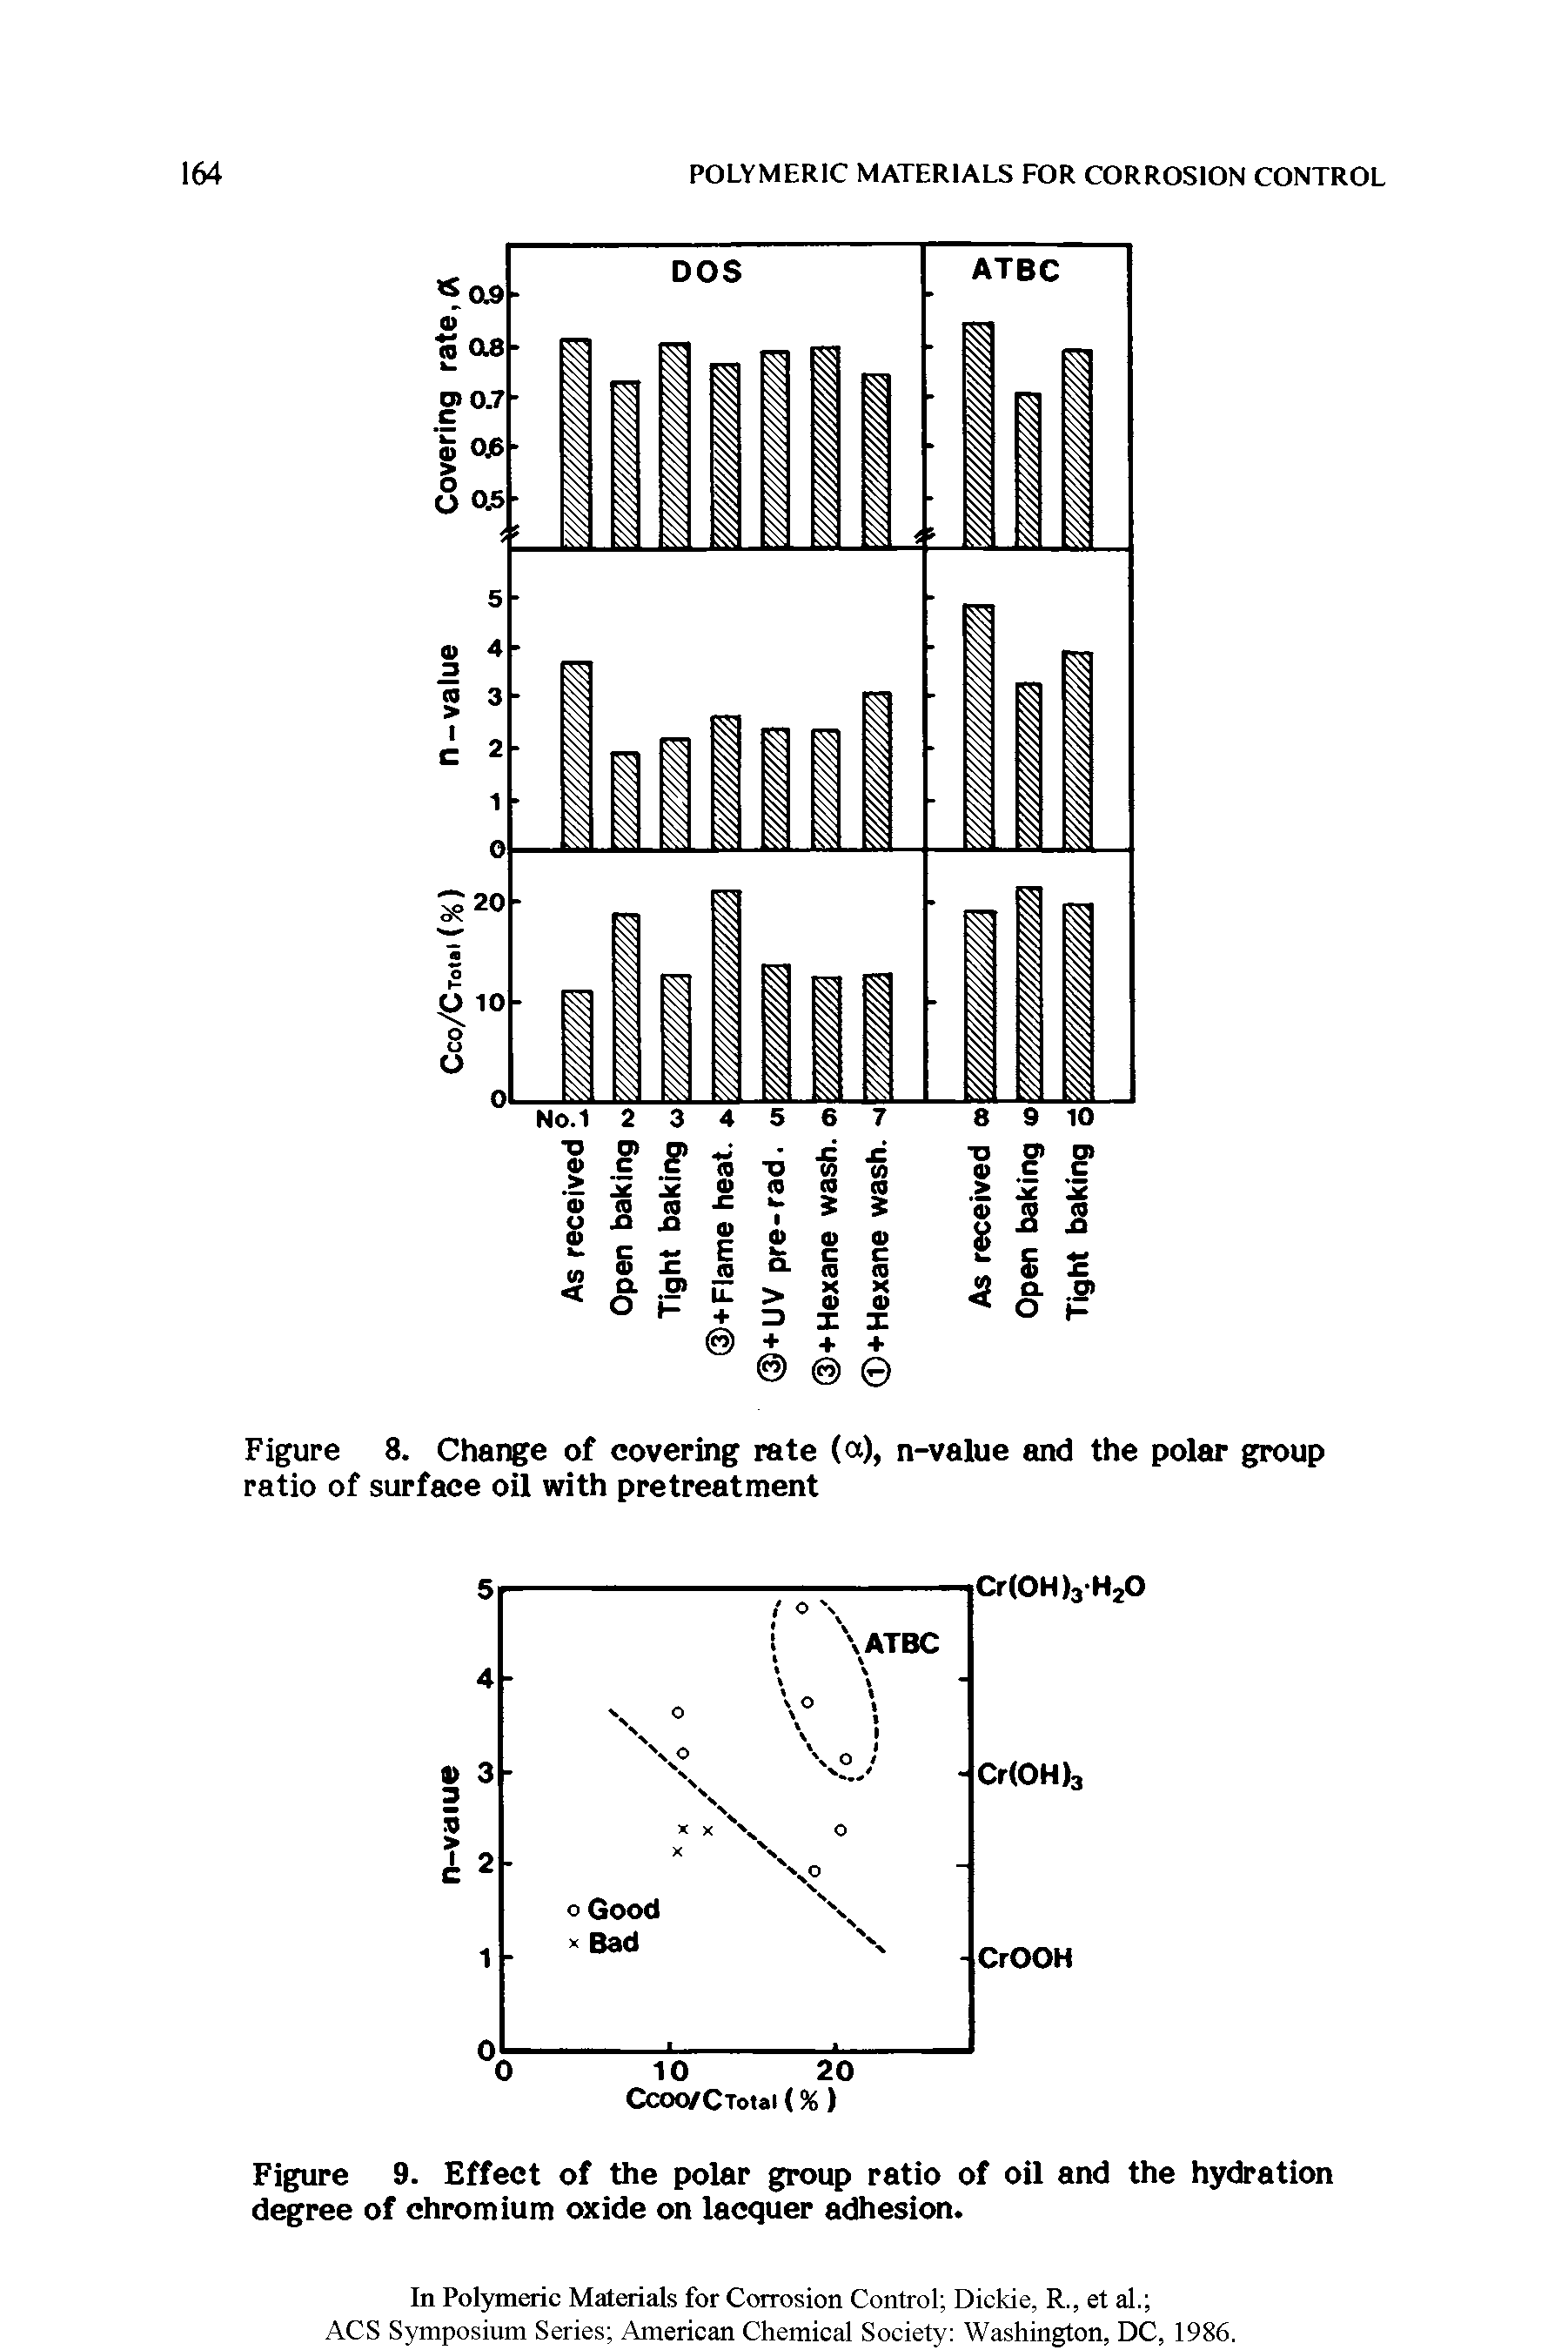 Figure 9. Effect of the polar group ratio of oil and the hydration degree of chromium oxide on lacquer adhesion.